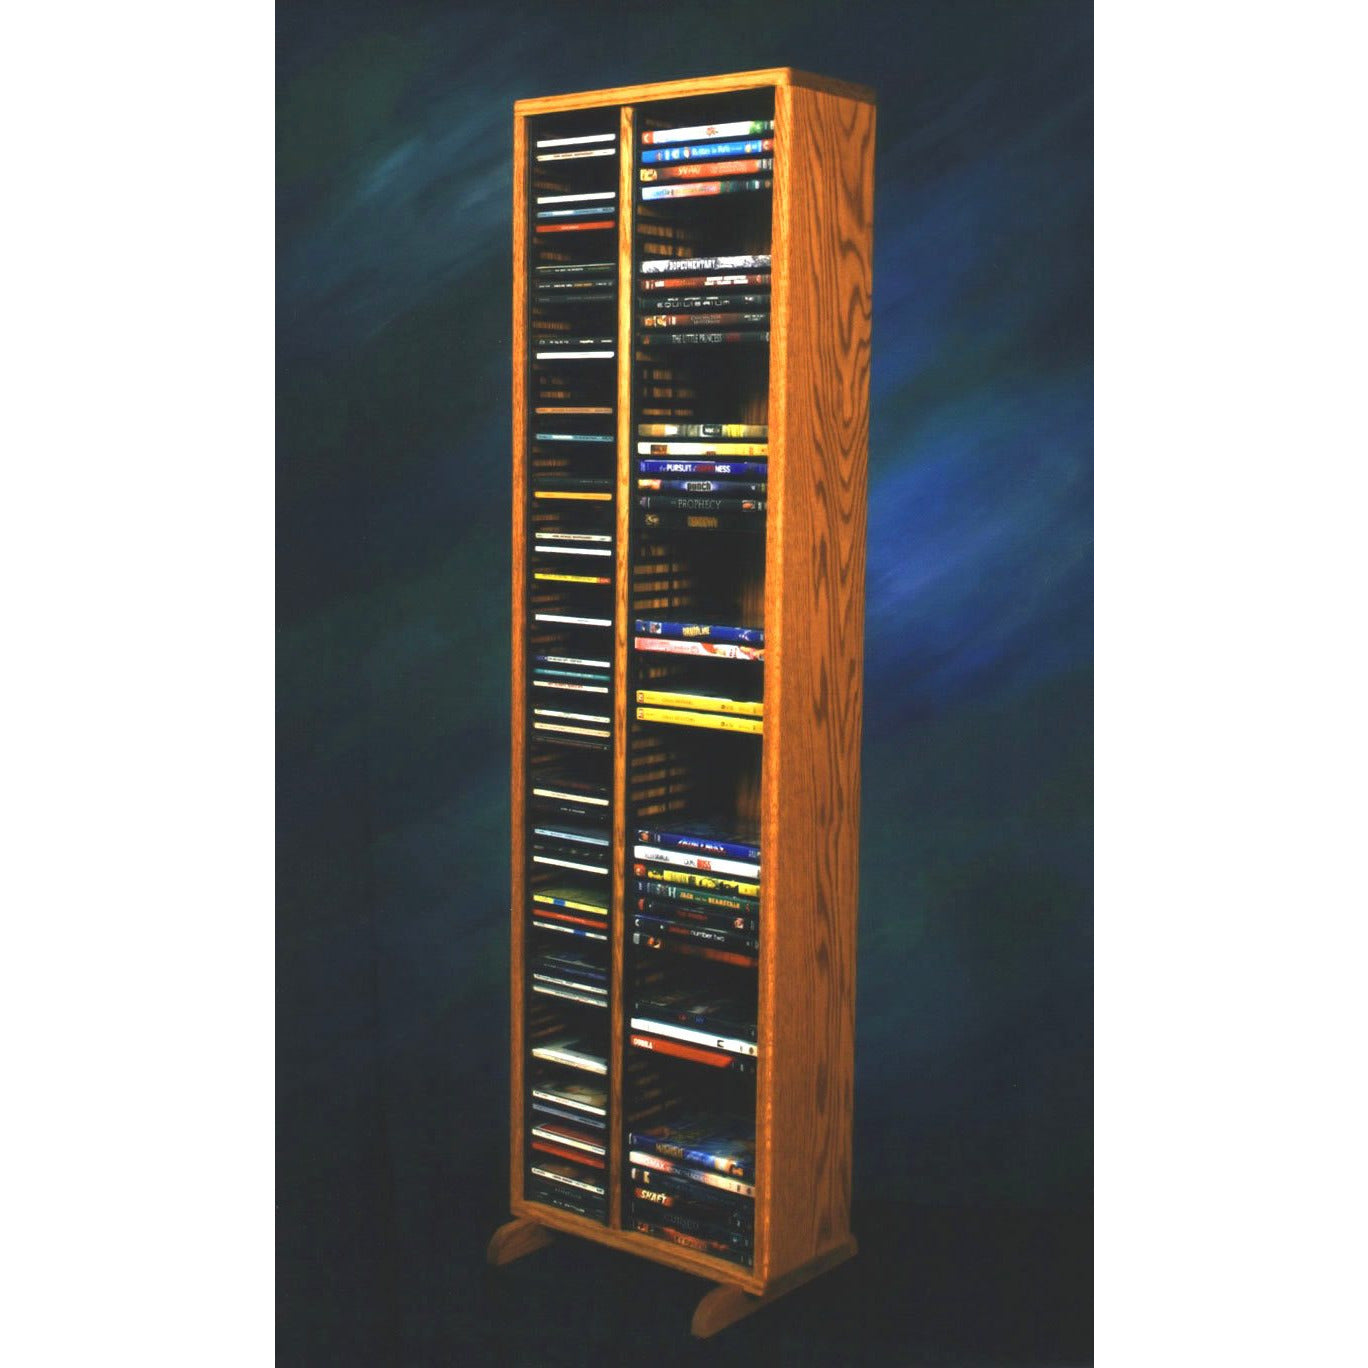 11 Series CD/DVD Combination Cabinets - 2 columns/shelves - 4 sizes